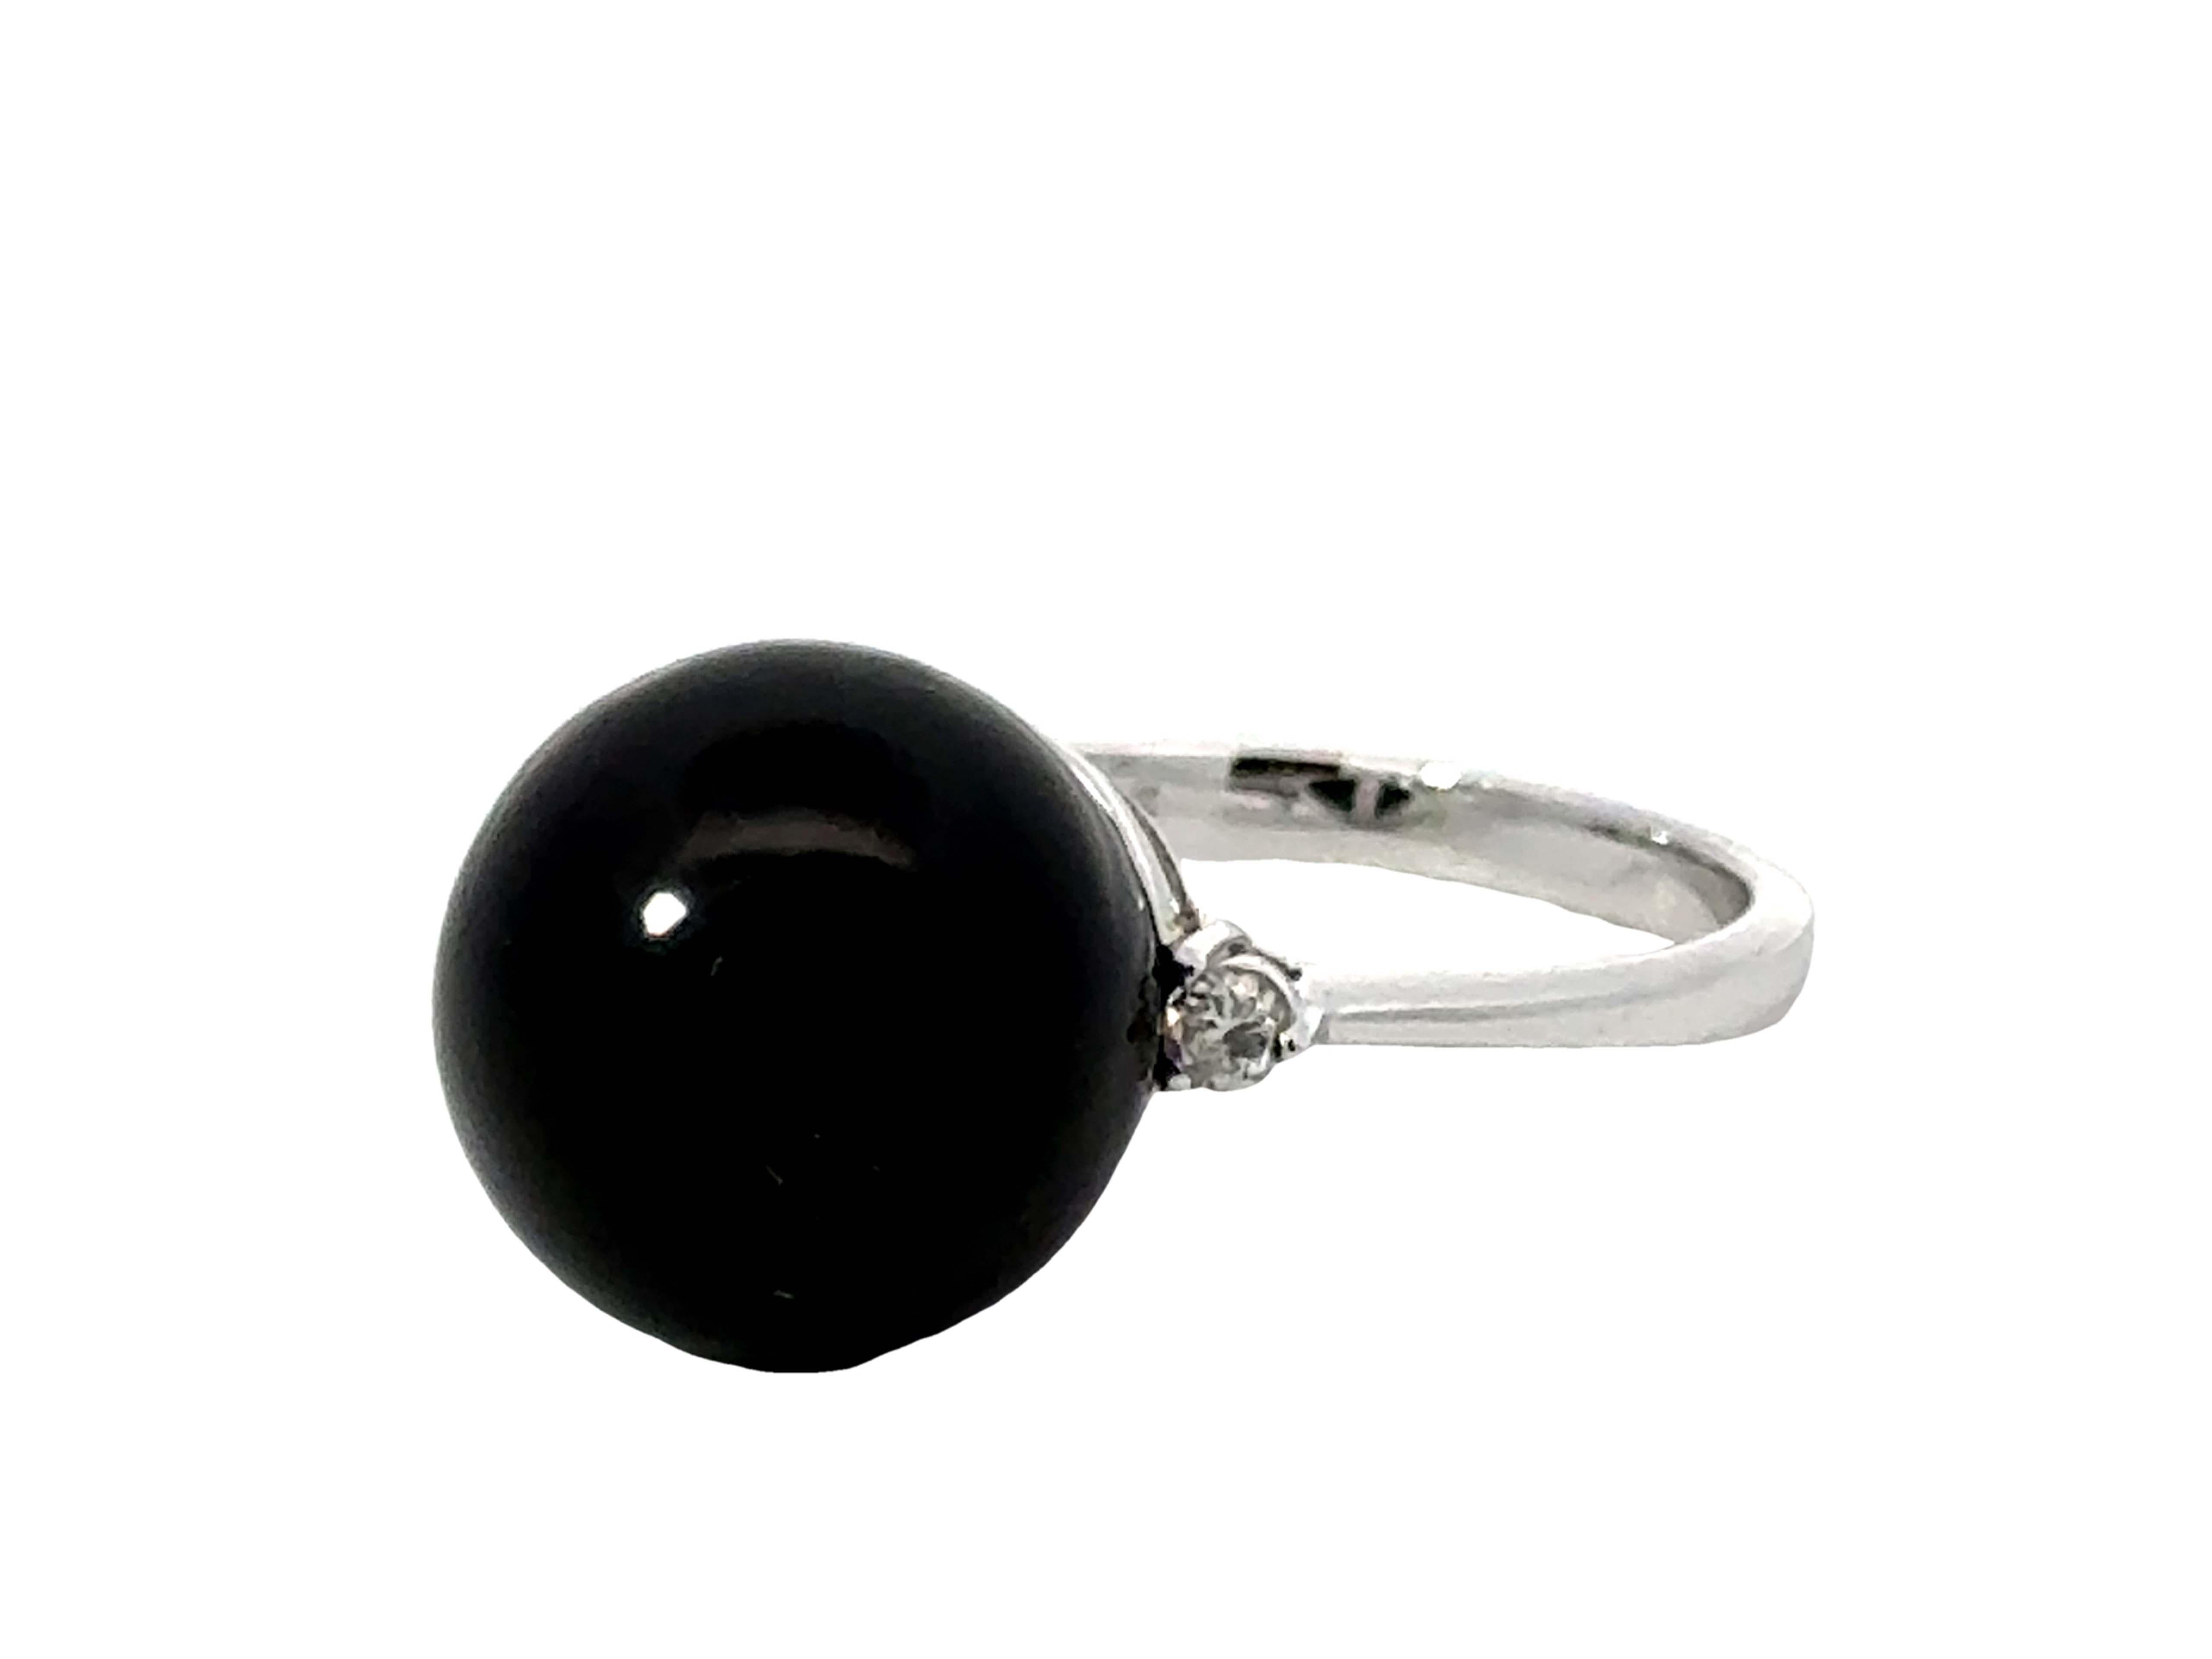 Brilliant Cut Black Onyx Sphere and Diamond Ring 14K White Gold For Sale